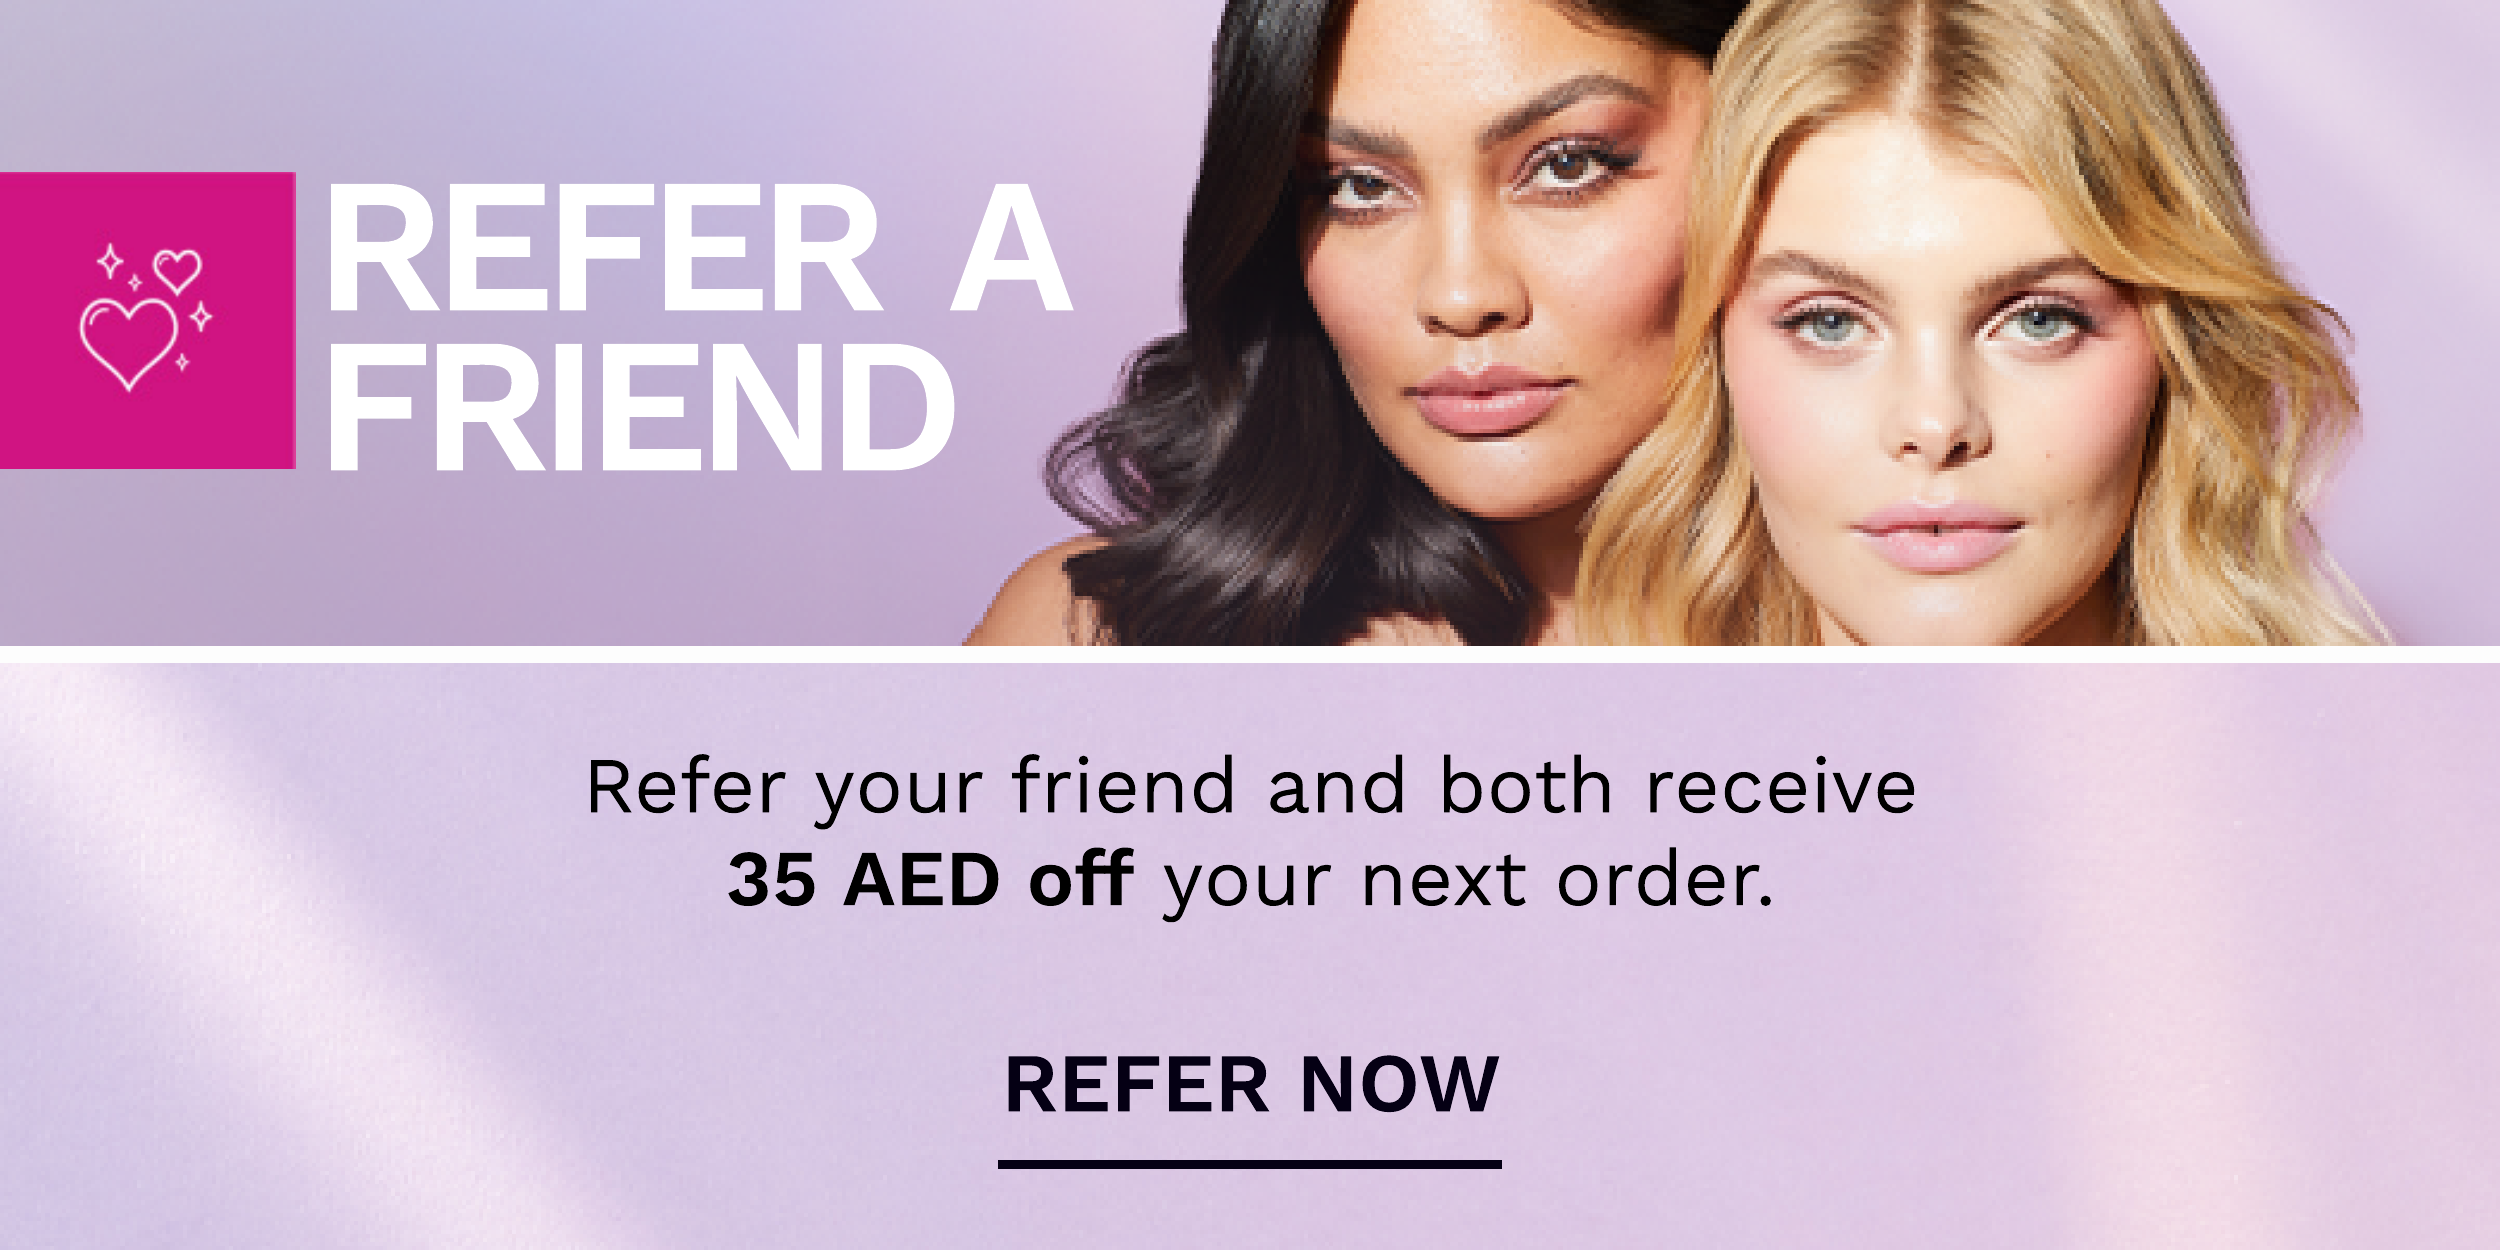  Refer your friend and both receive 35 AED off your next order. REFER NOW 